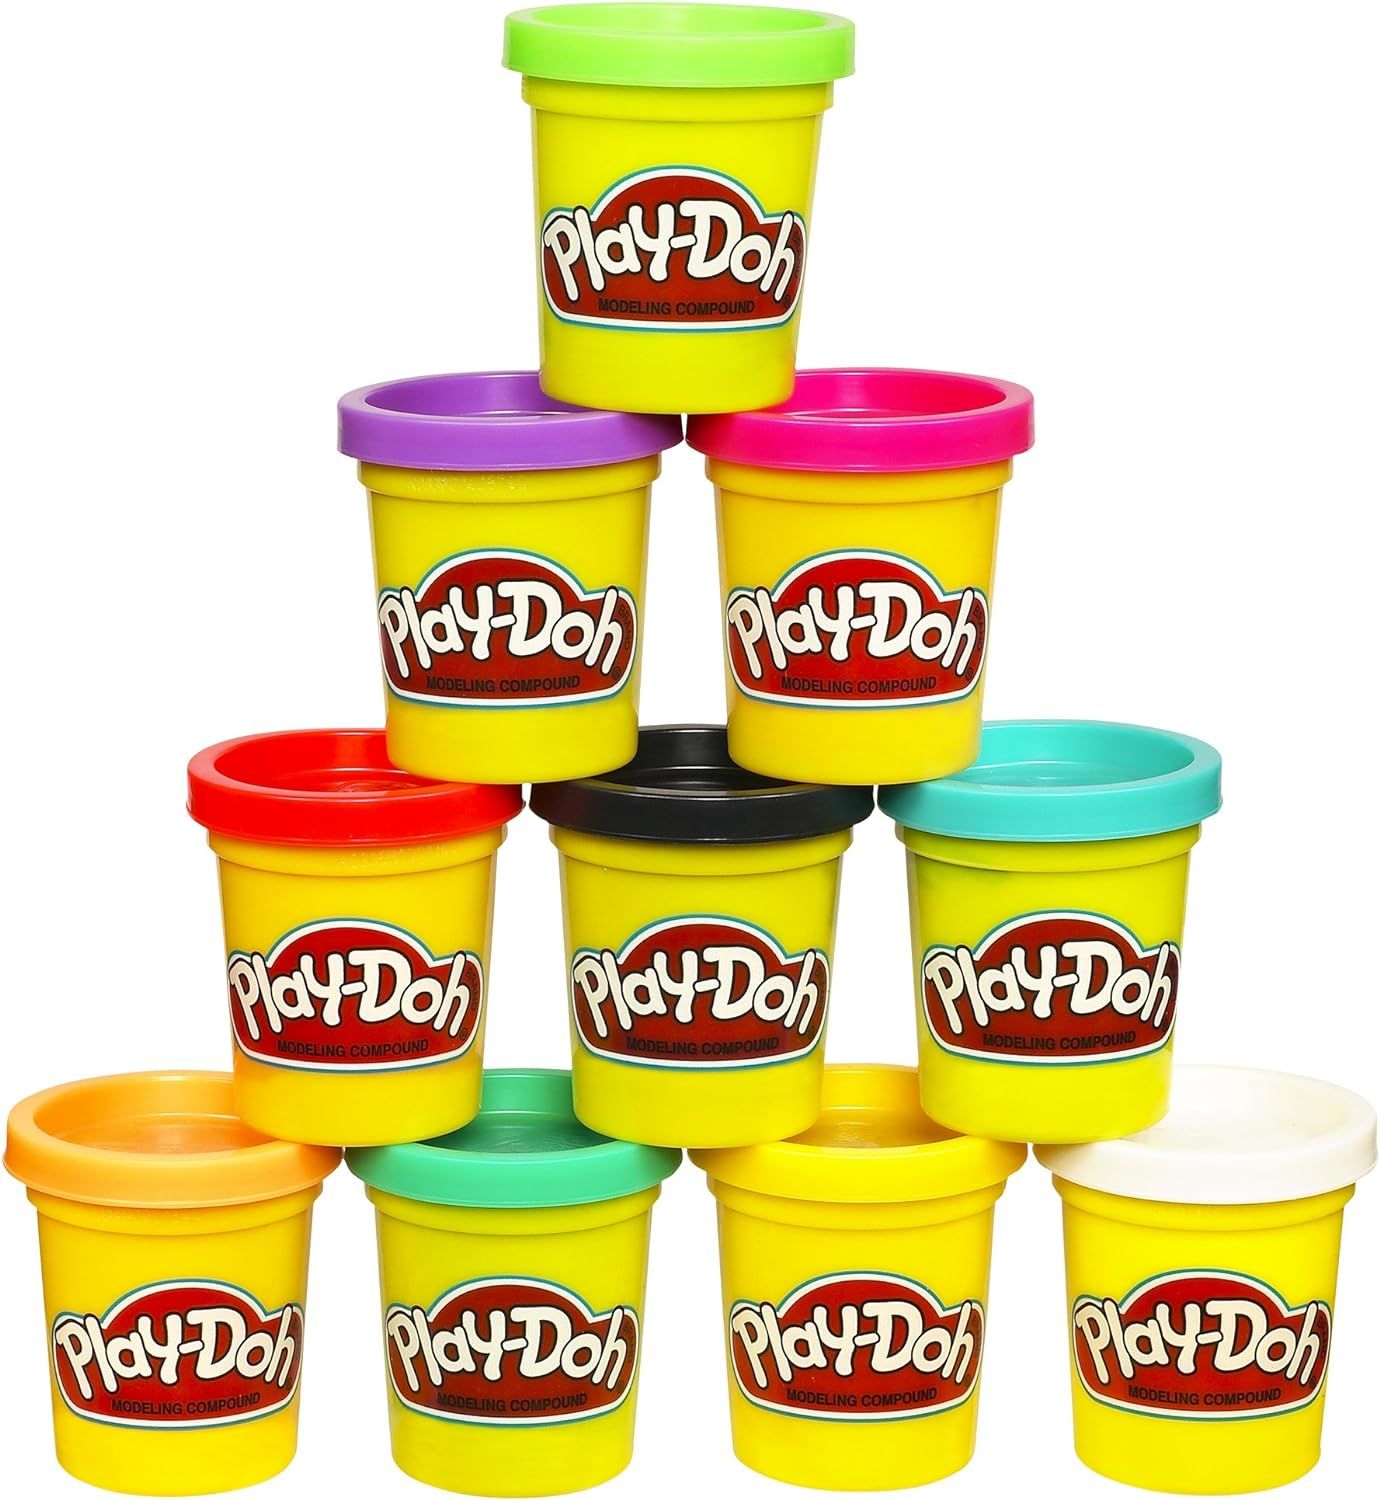 Play-Doh Modeling Compound 10 Pack Case of Colors, Non-Toxic, Assorted Colors, 2 Oz Cans, Ages 2 ... | Amazon (US)